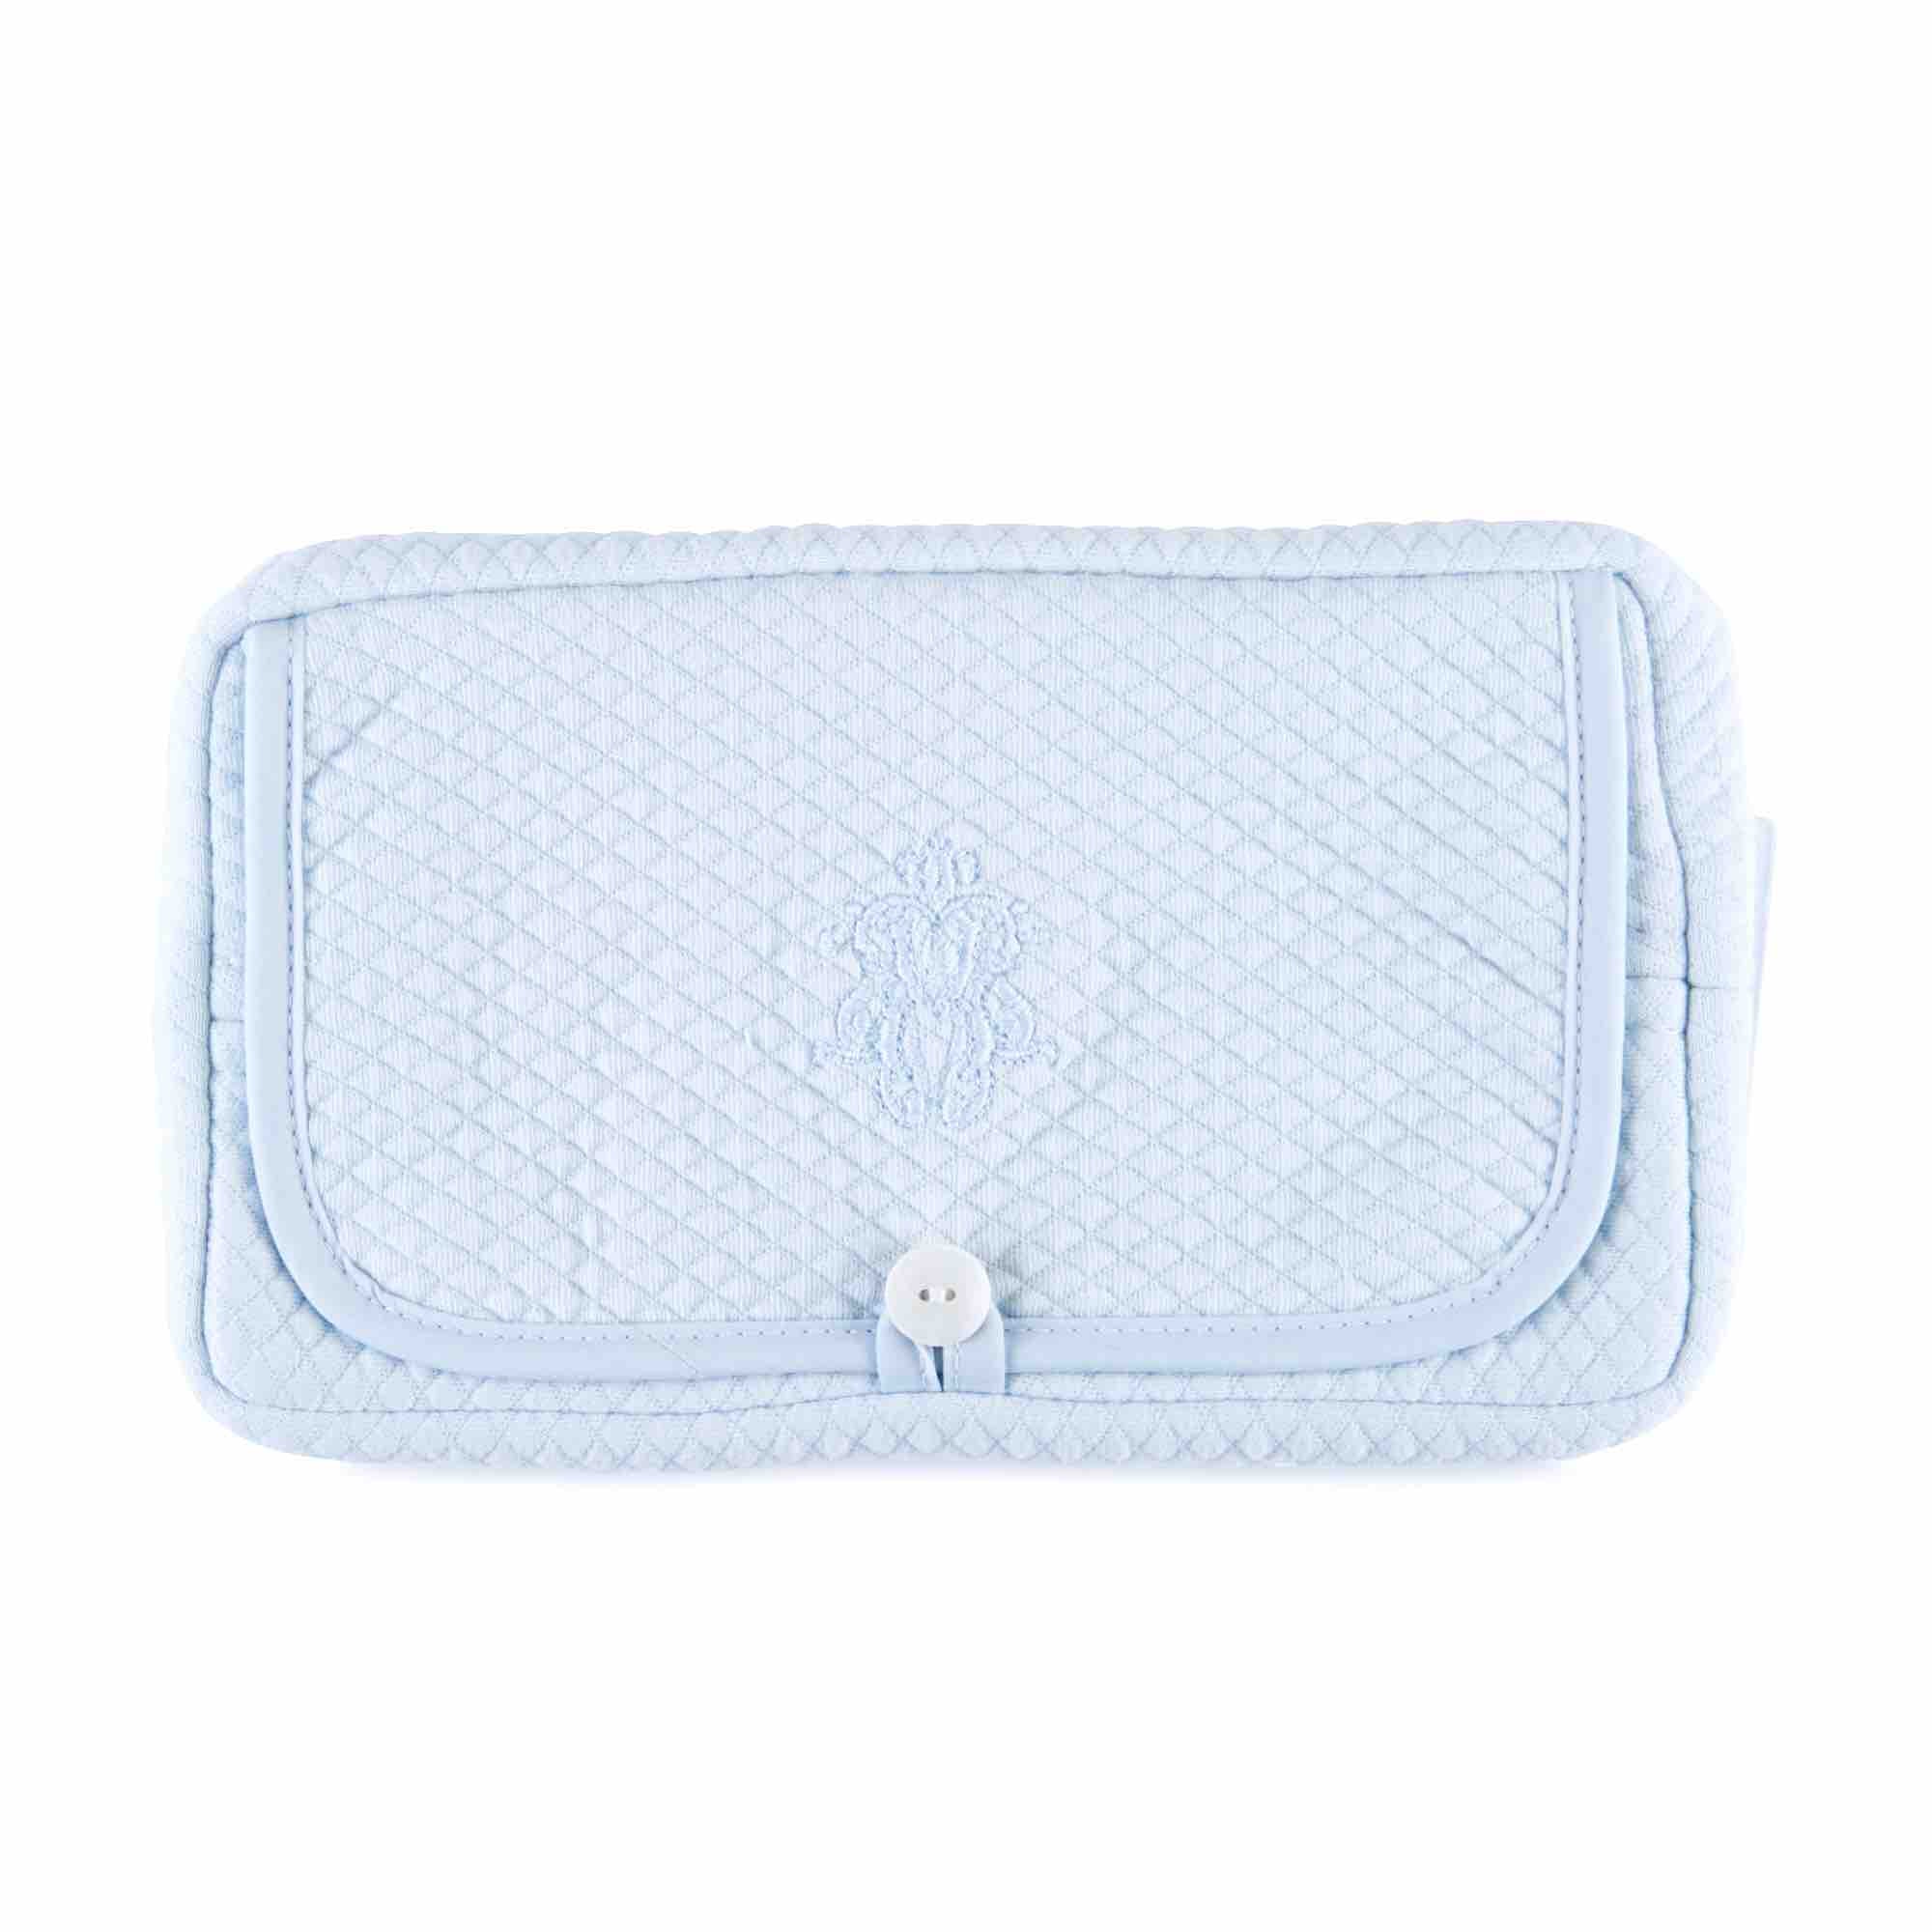 Theophile & Patachou Travel Baby Wipes Cover - Royal Blue